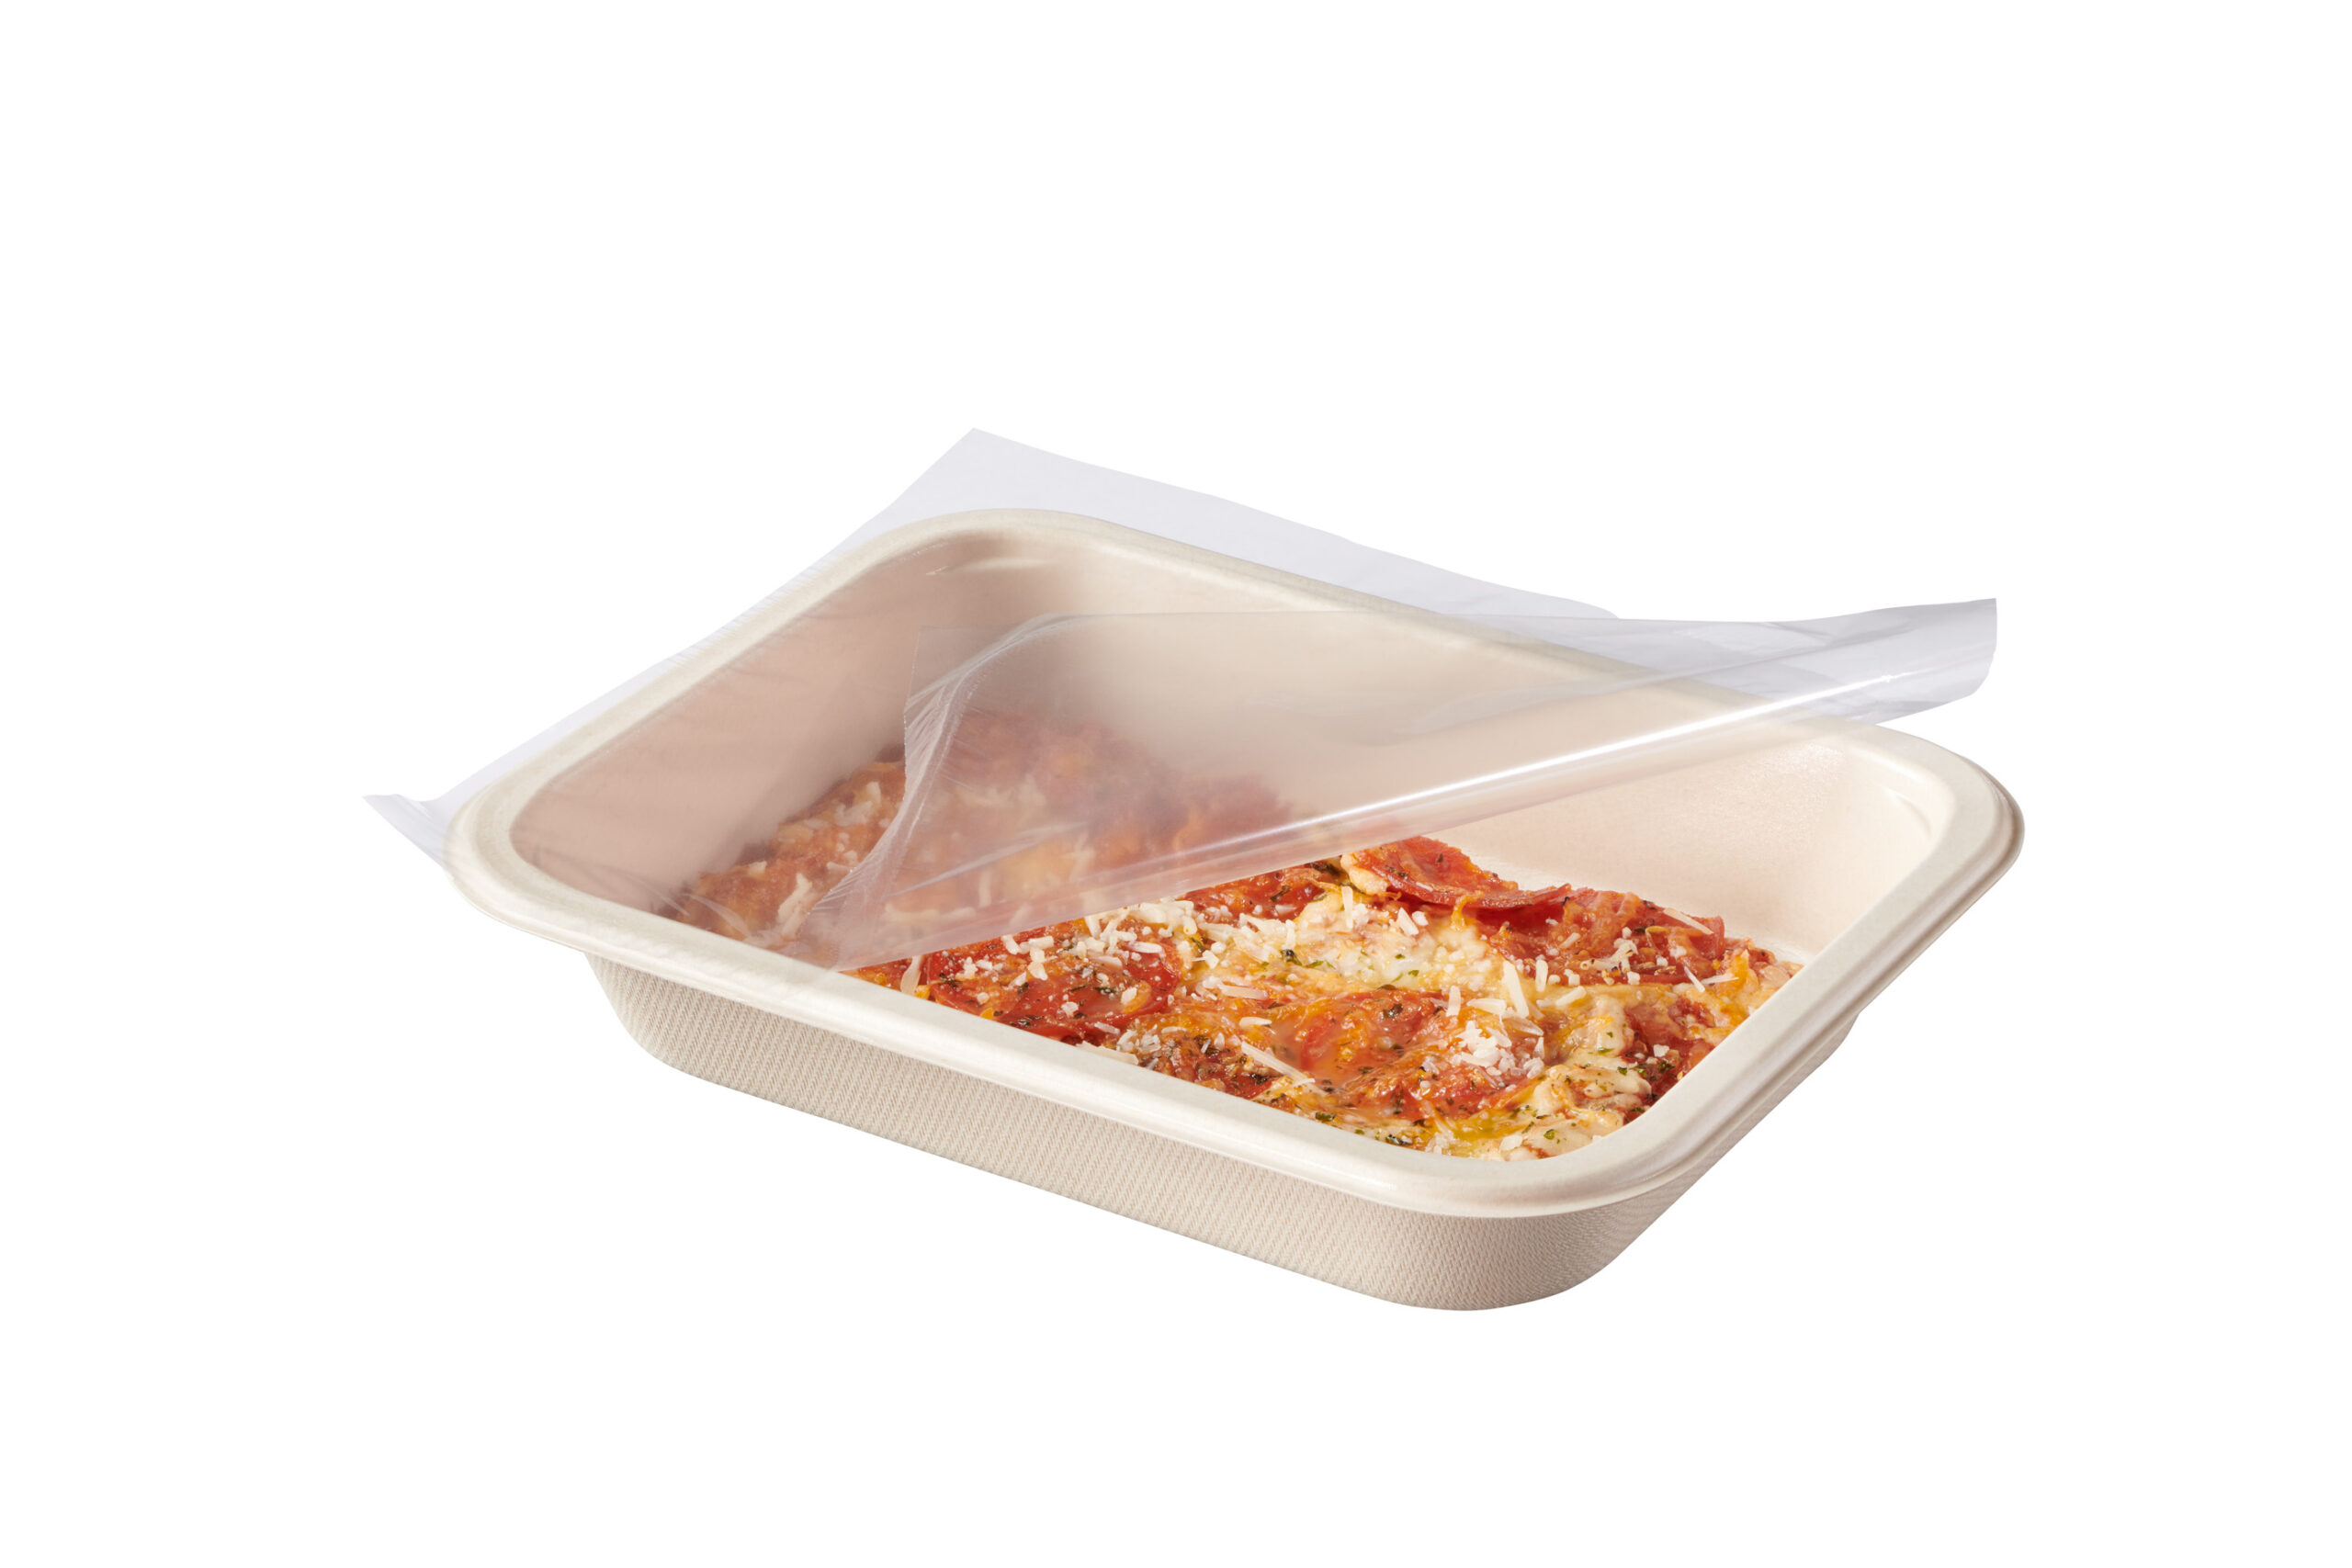 Compostable Food Tray with Pizza, showing film being peeled off